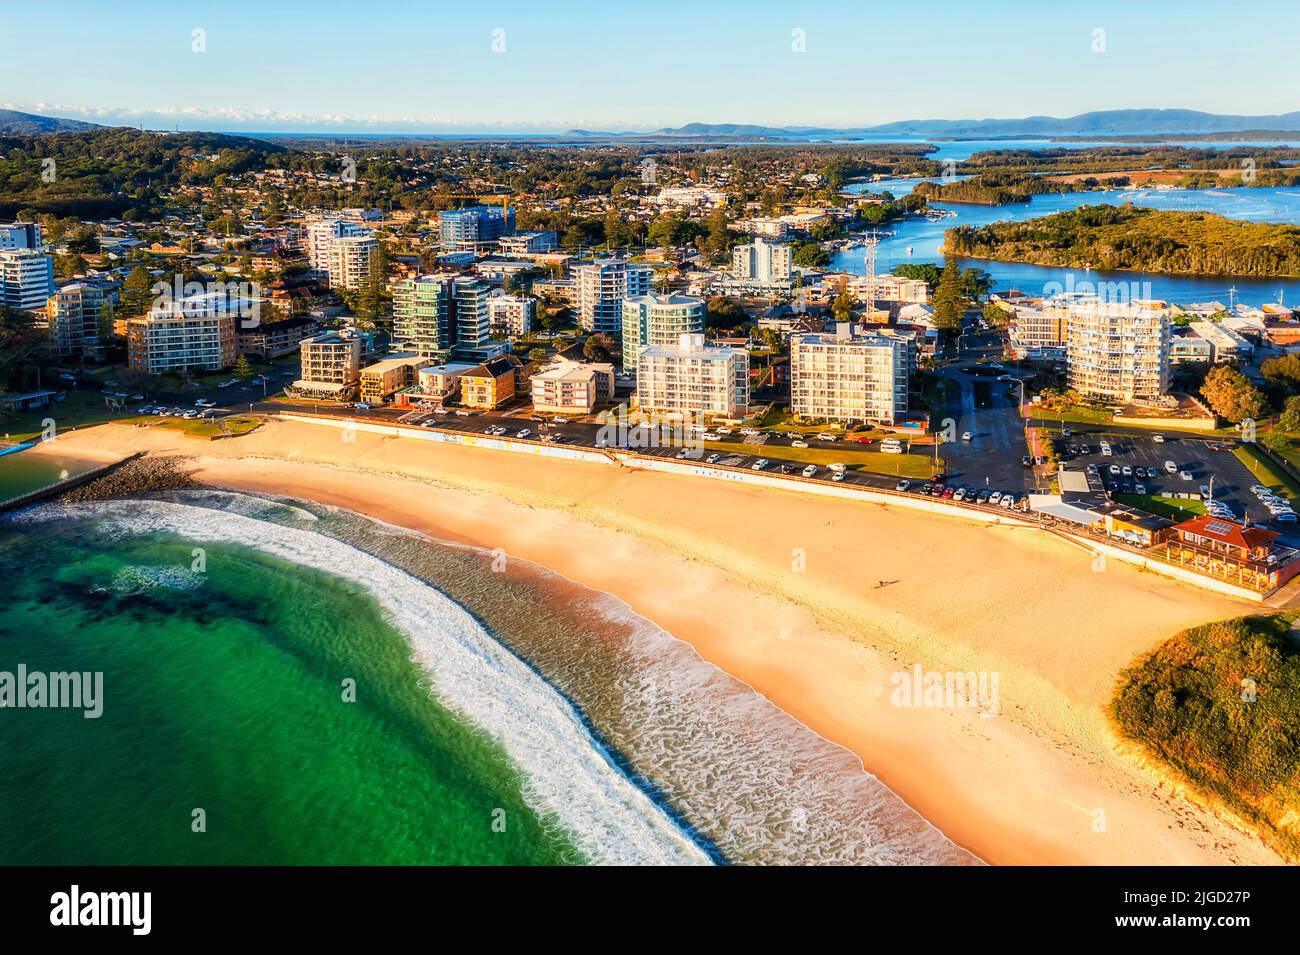 Forster sandy beach with emerald water of Pacific ocean and rock pool at Forster town waterfront in Australia - aerial townscape. Stock Photo